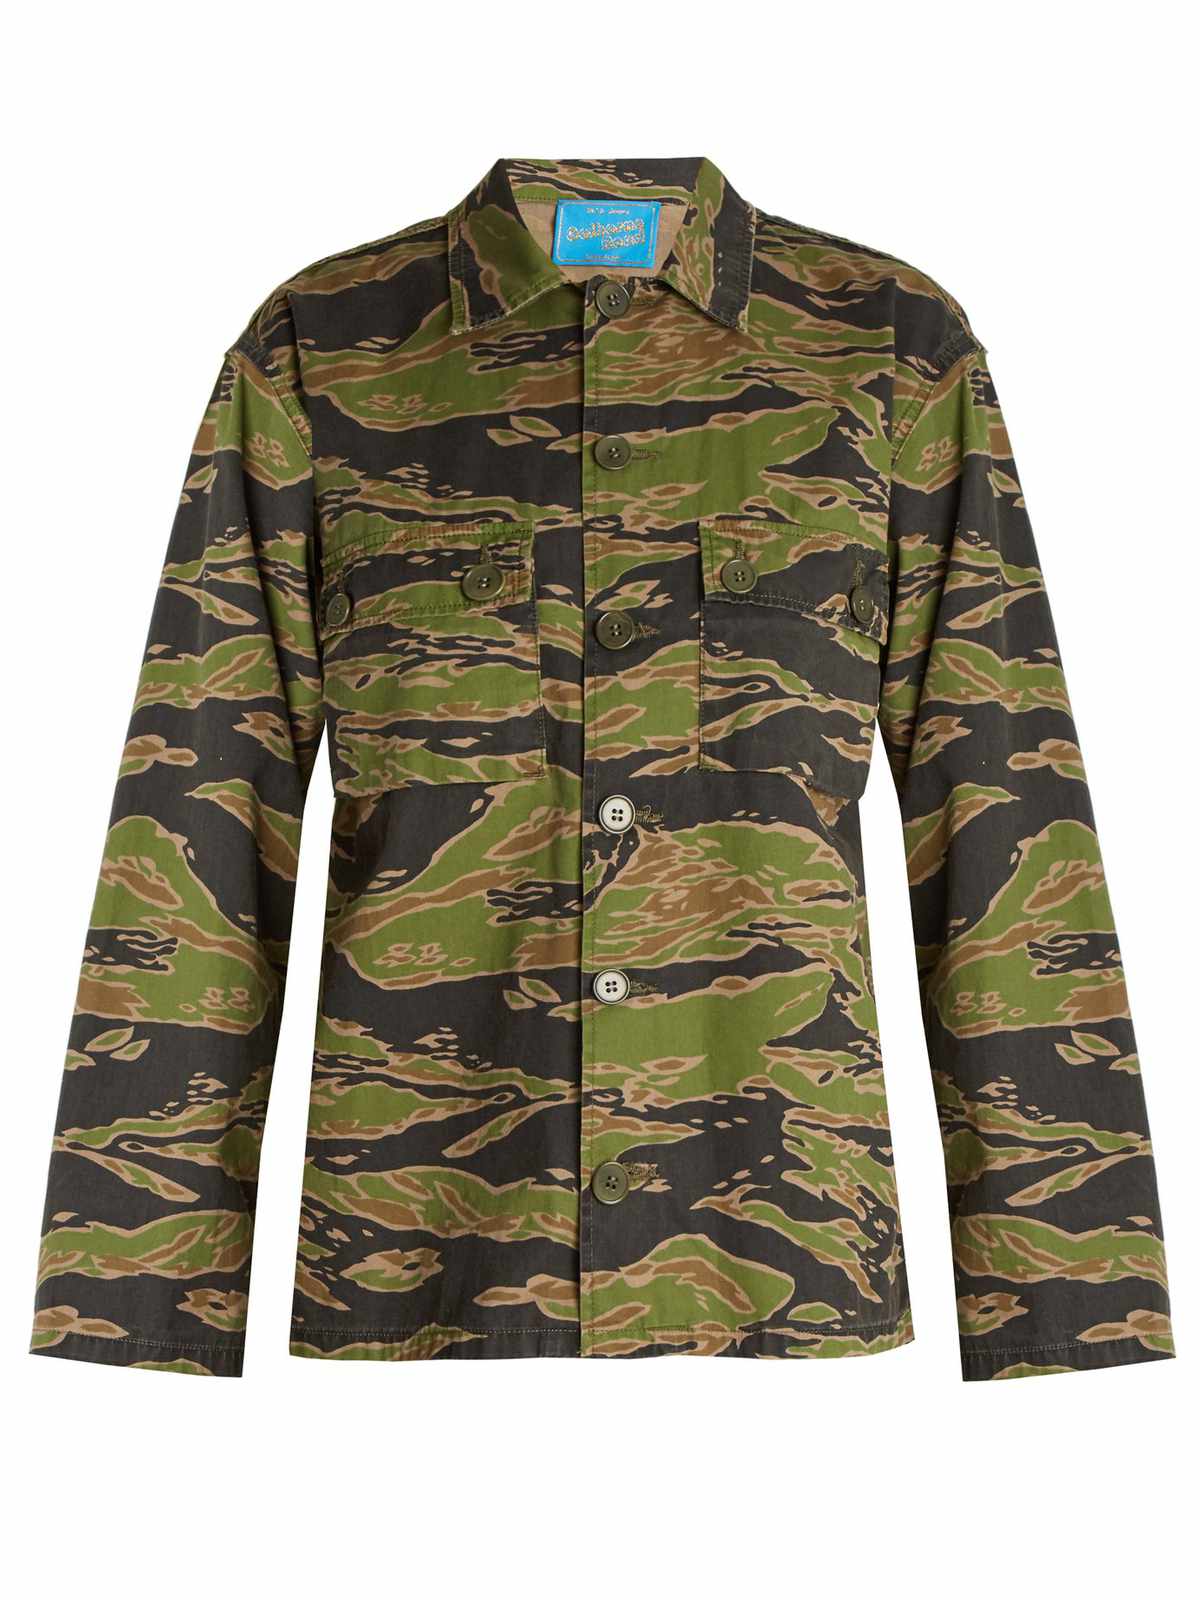 The Best Camoflage Pieces to Where Now | InStyle